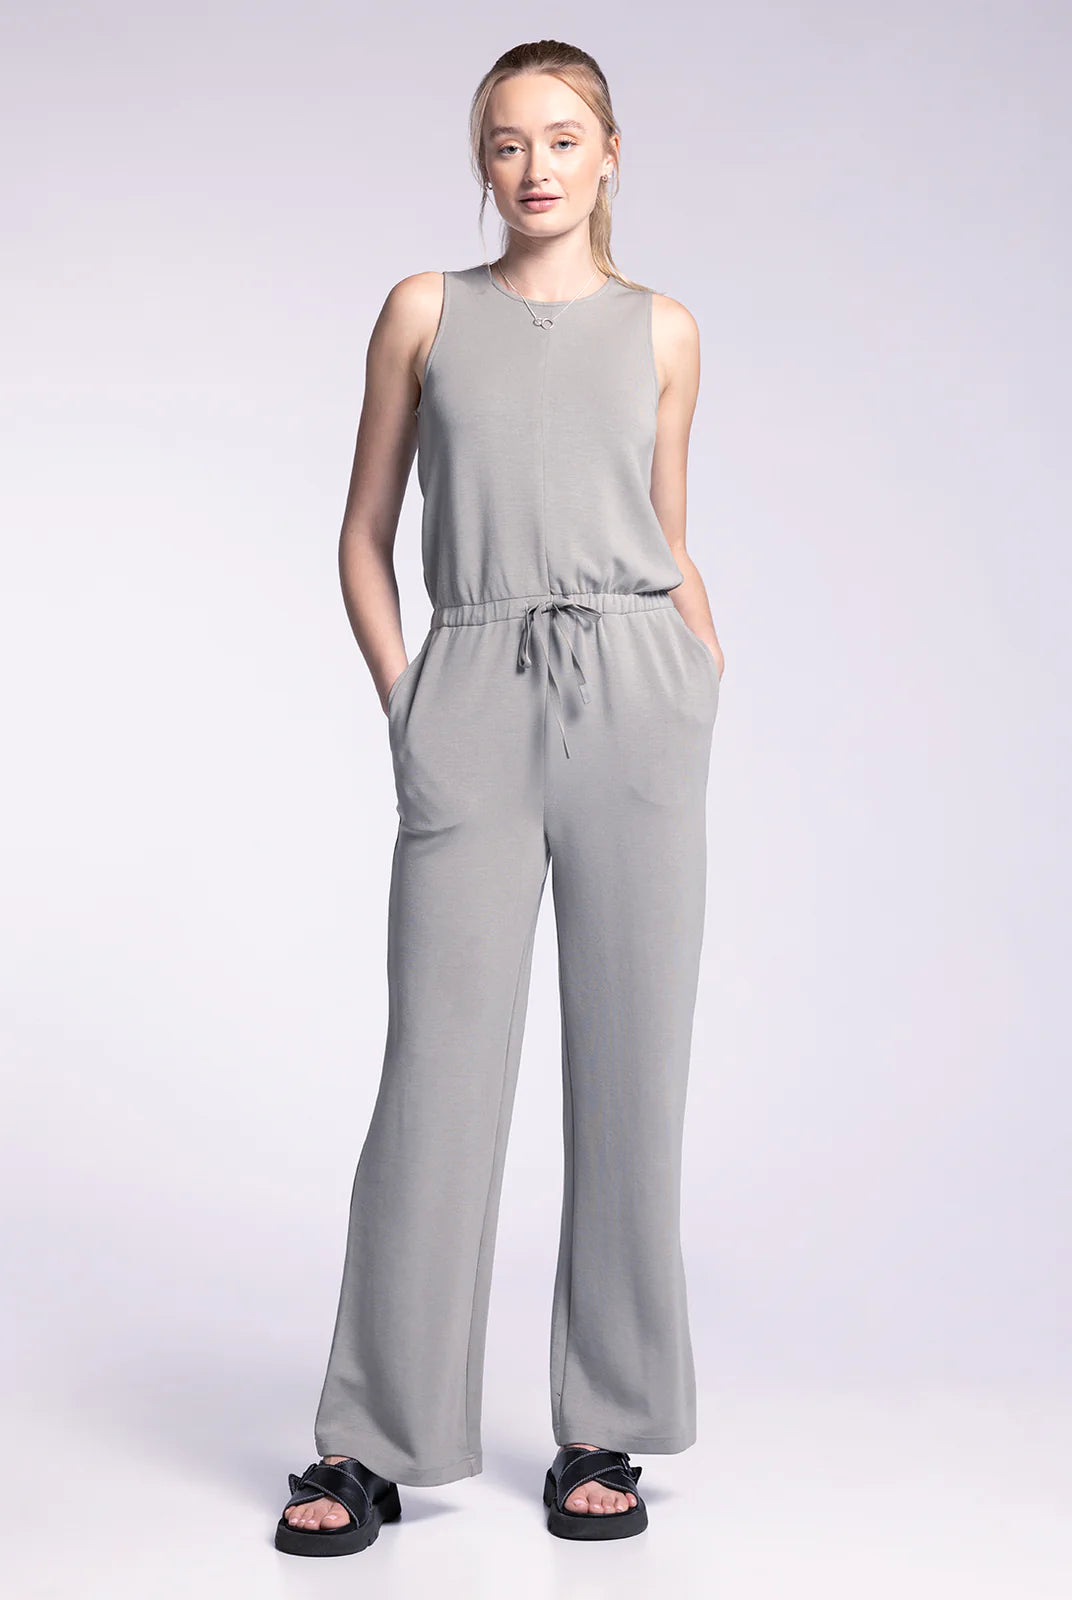 Green Sleeveless Jumpsuit Apex Ethical Boutique